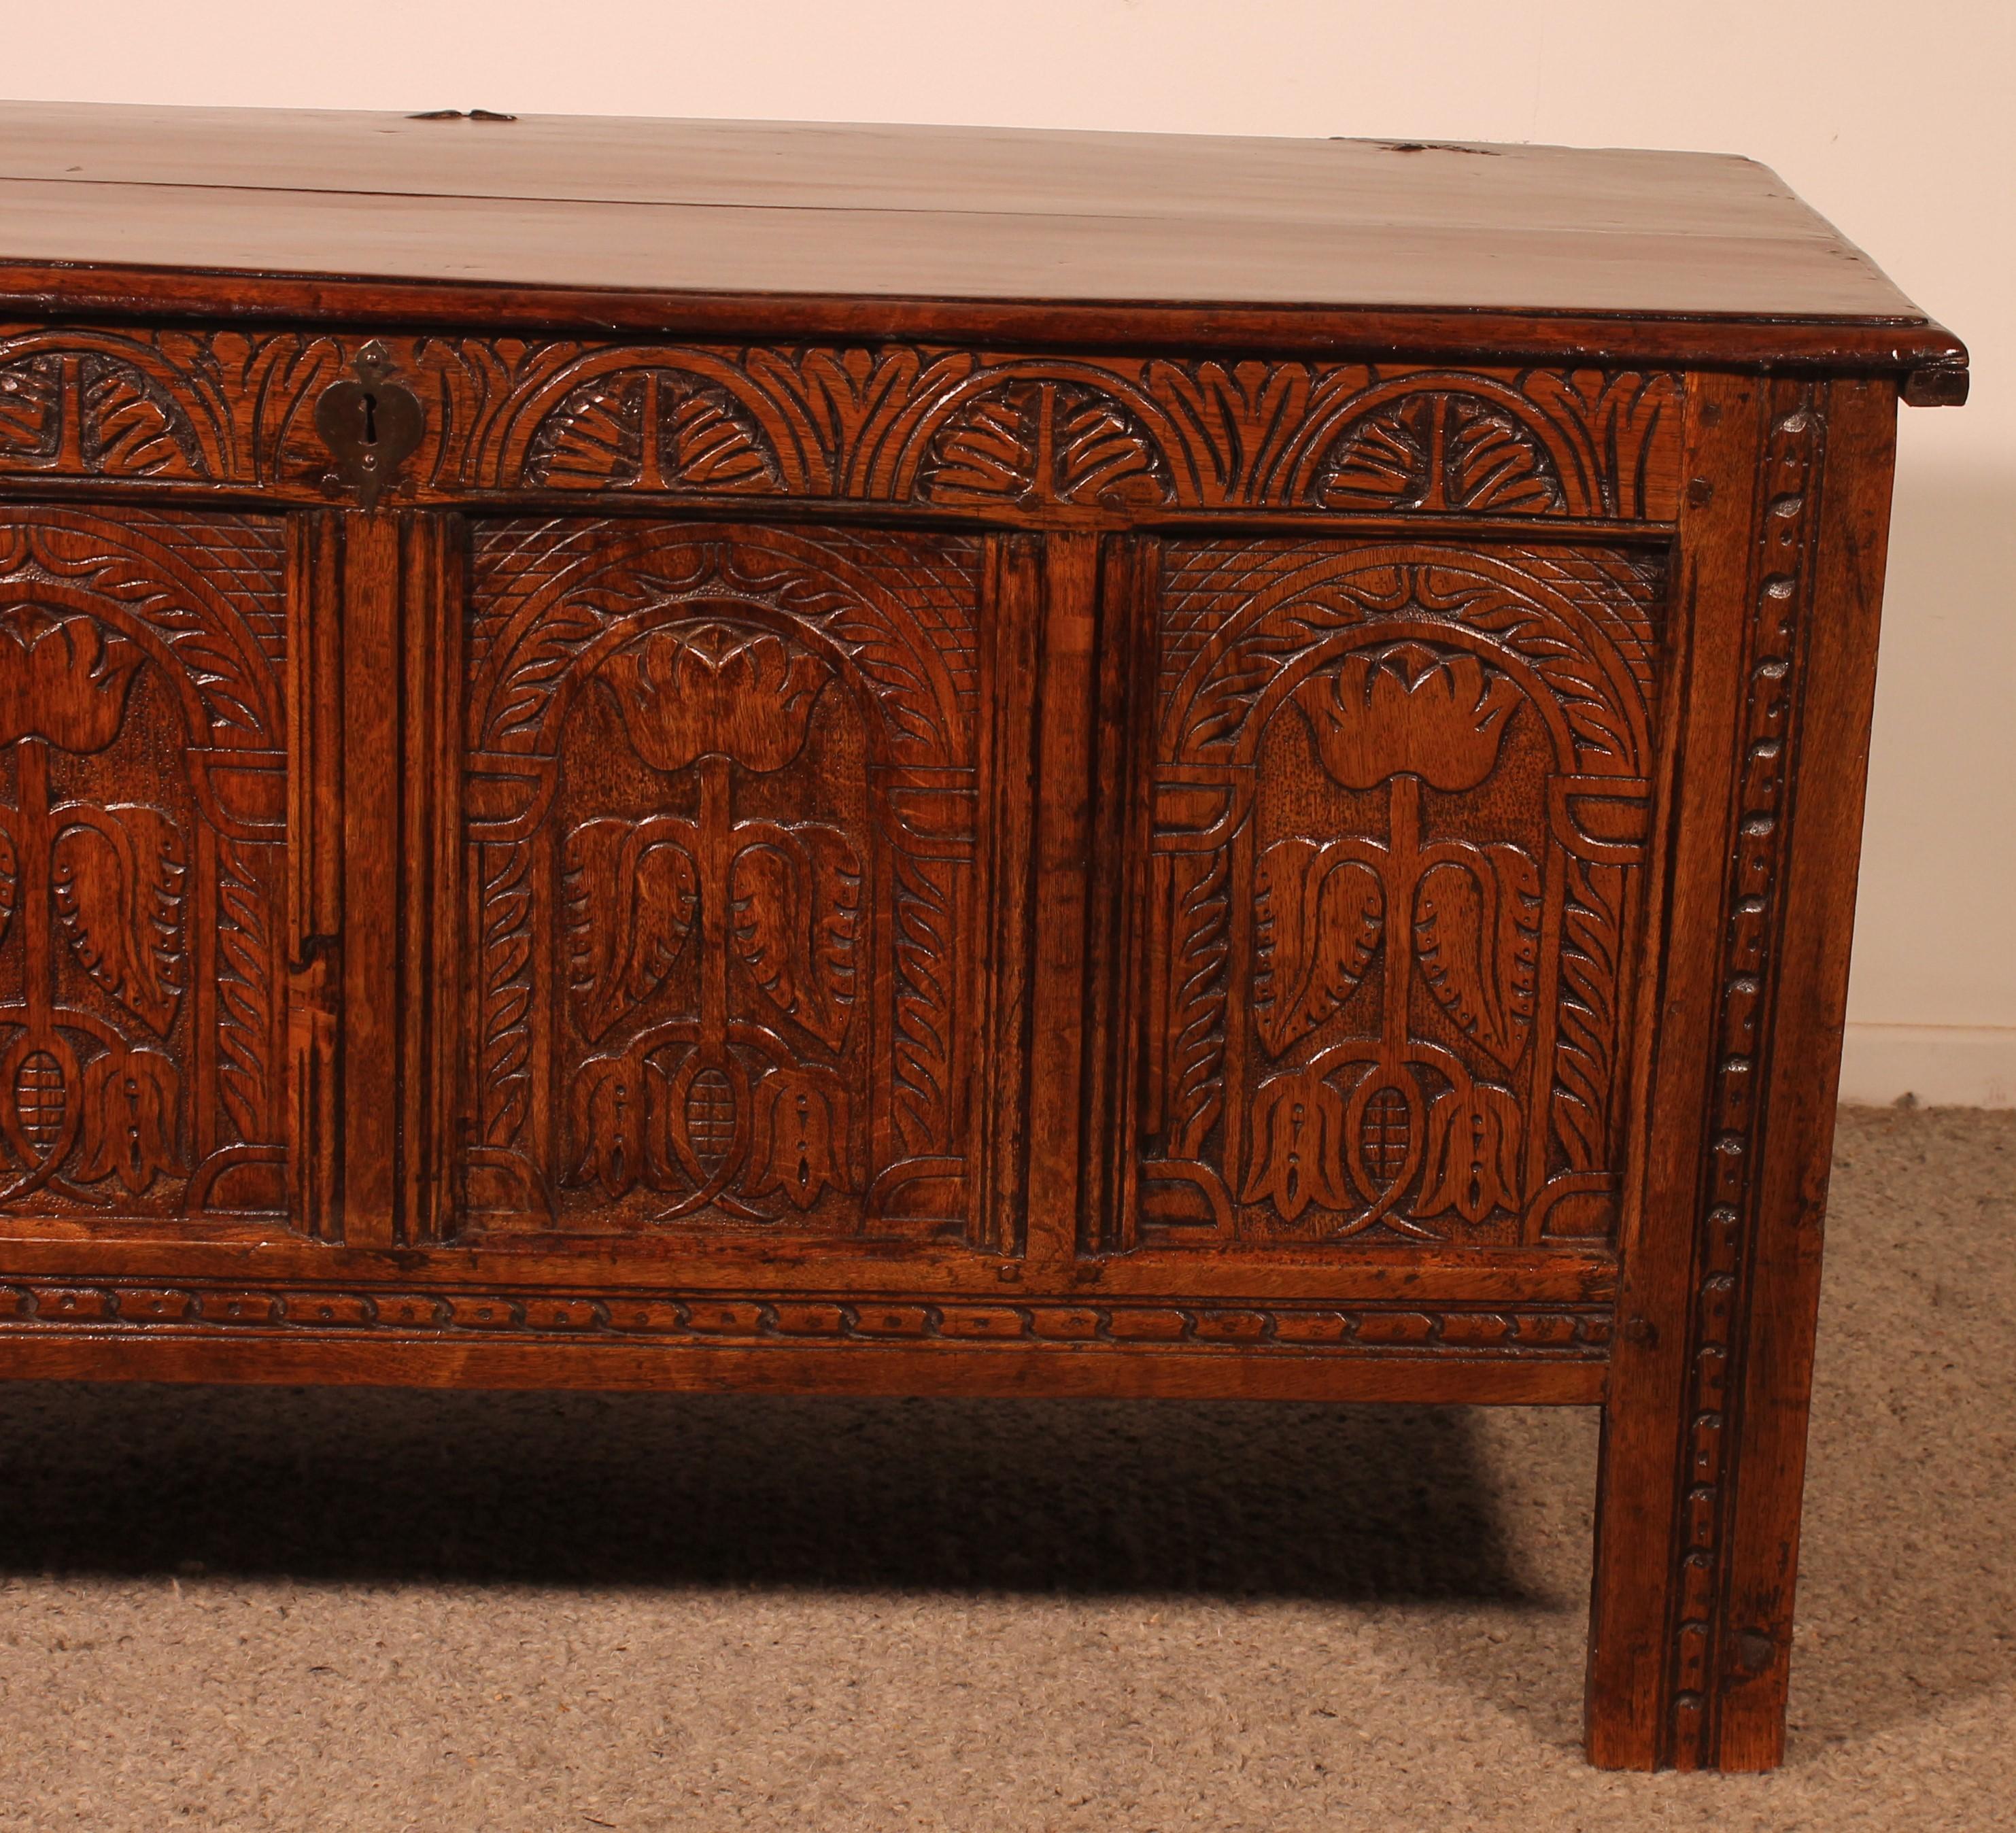 Superb English chest from the 17th century in oak composed of 4 panels
 rare chest due to its quality of sculpture which is exceptional and its 4 panels since very often 3 panels
Very beautiful decor describing arches with flowers inside
Paneled